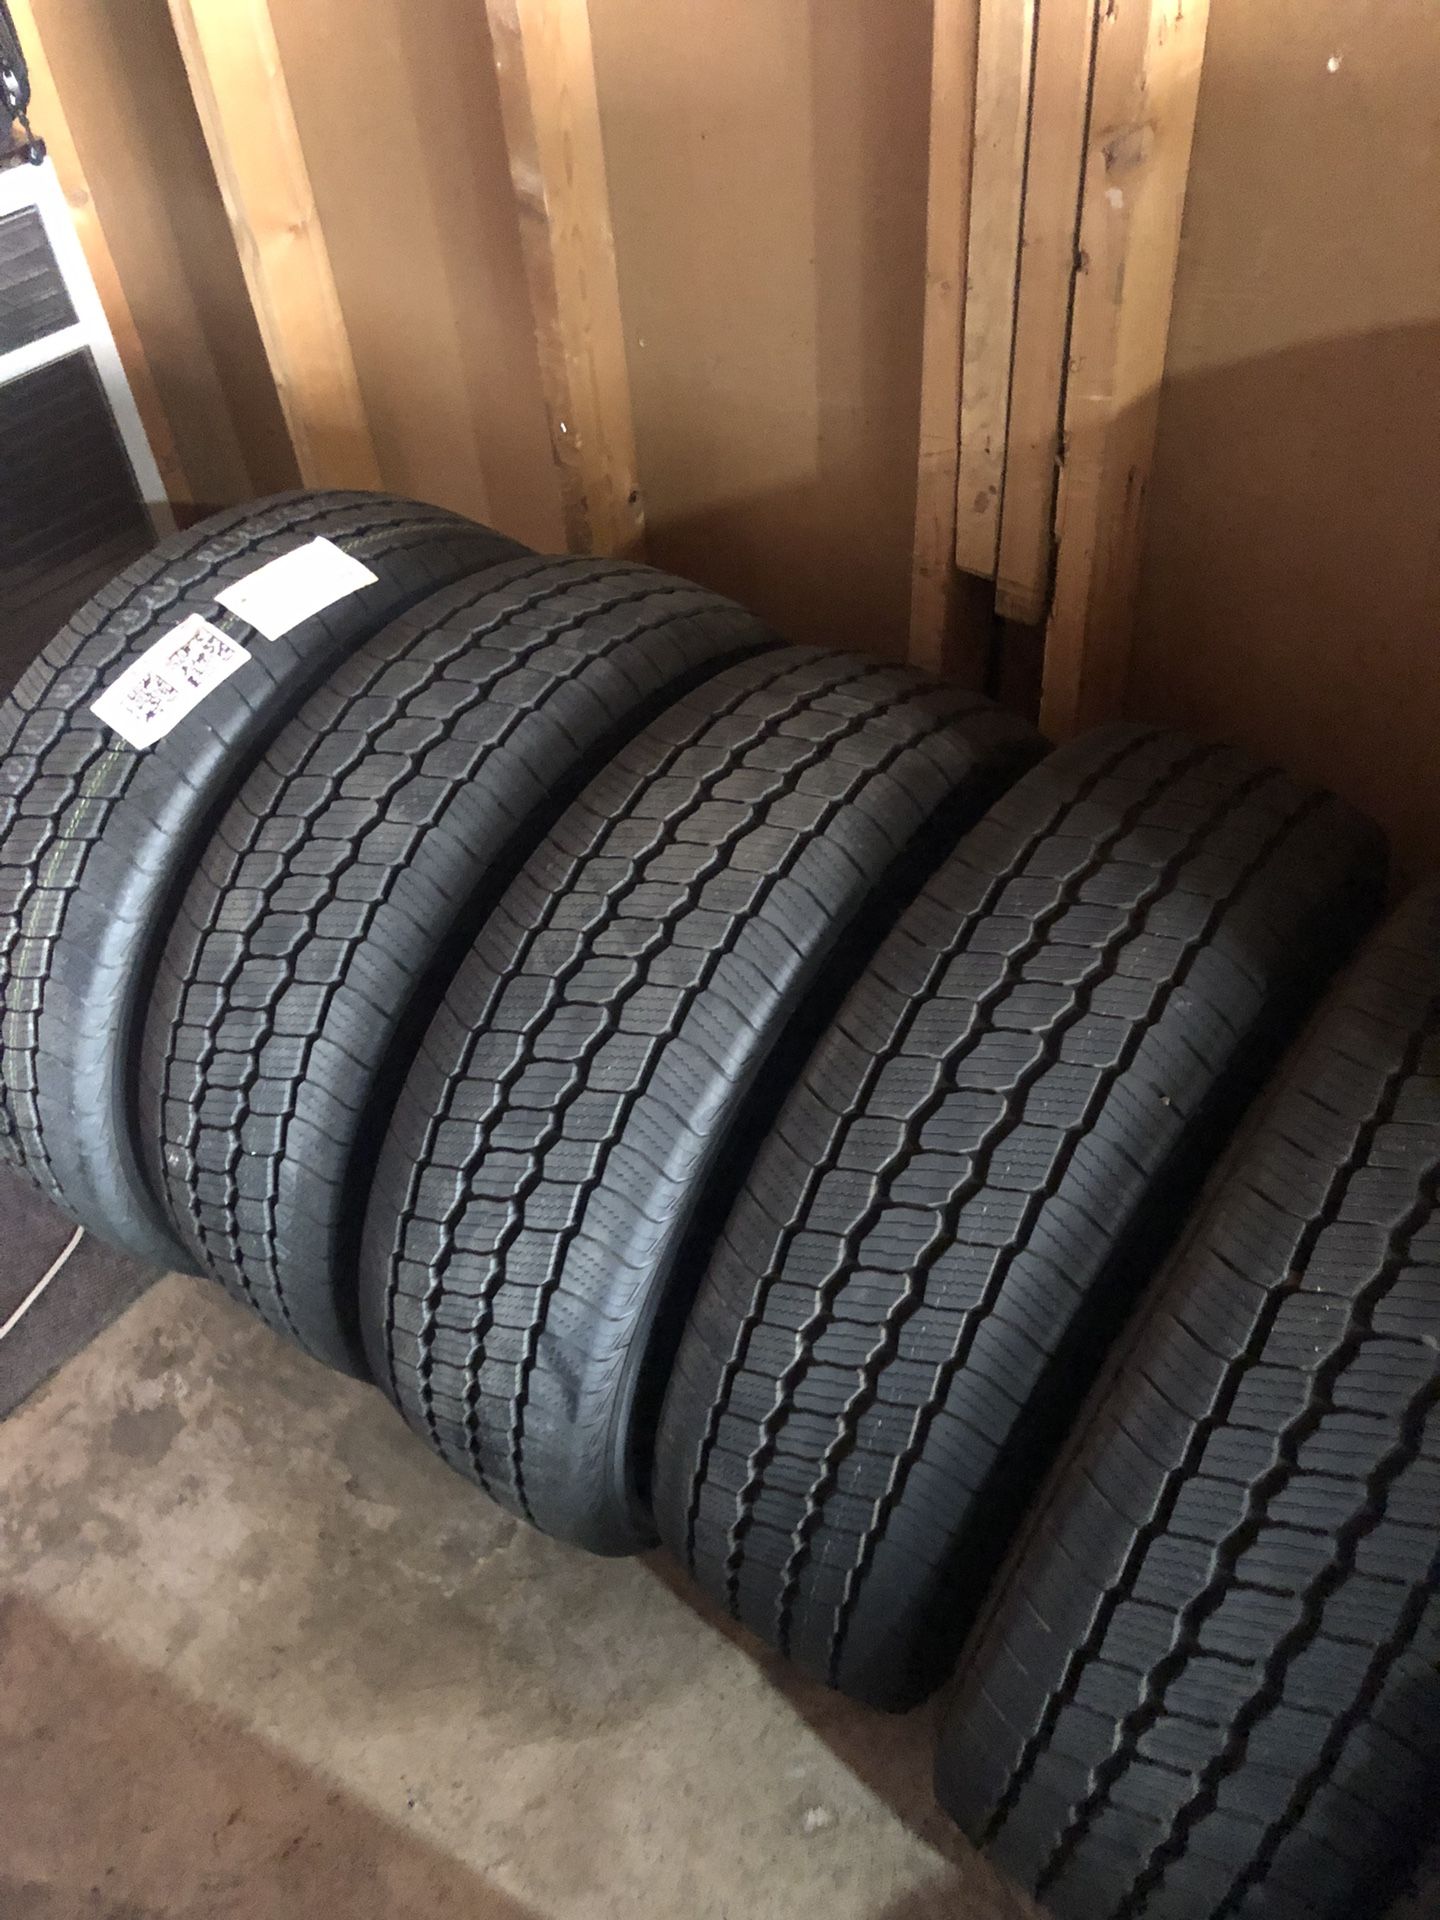 New Sprinter LT 245 75 16 Kumho Crugen HT 51 New Dealer Take Offs. 10 Miles. $750  100% Complete Caps , Studs And Sensors Included Fully Balanced